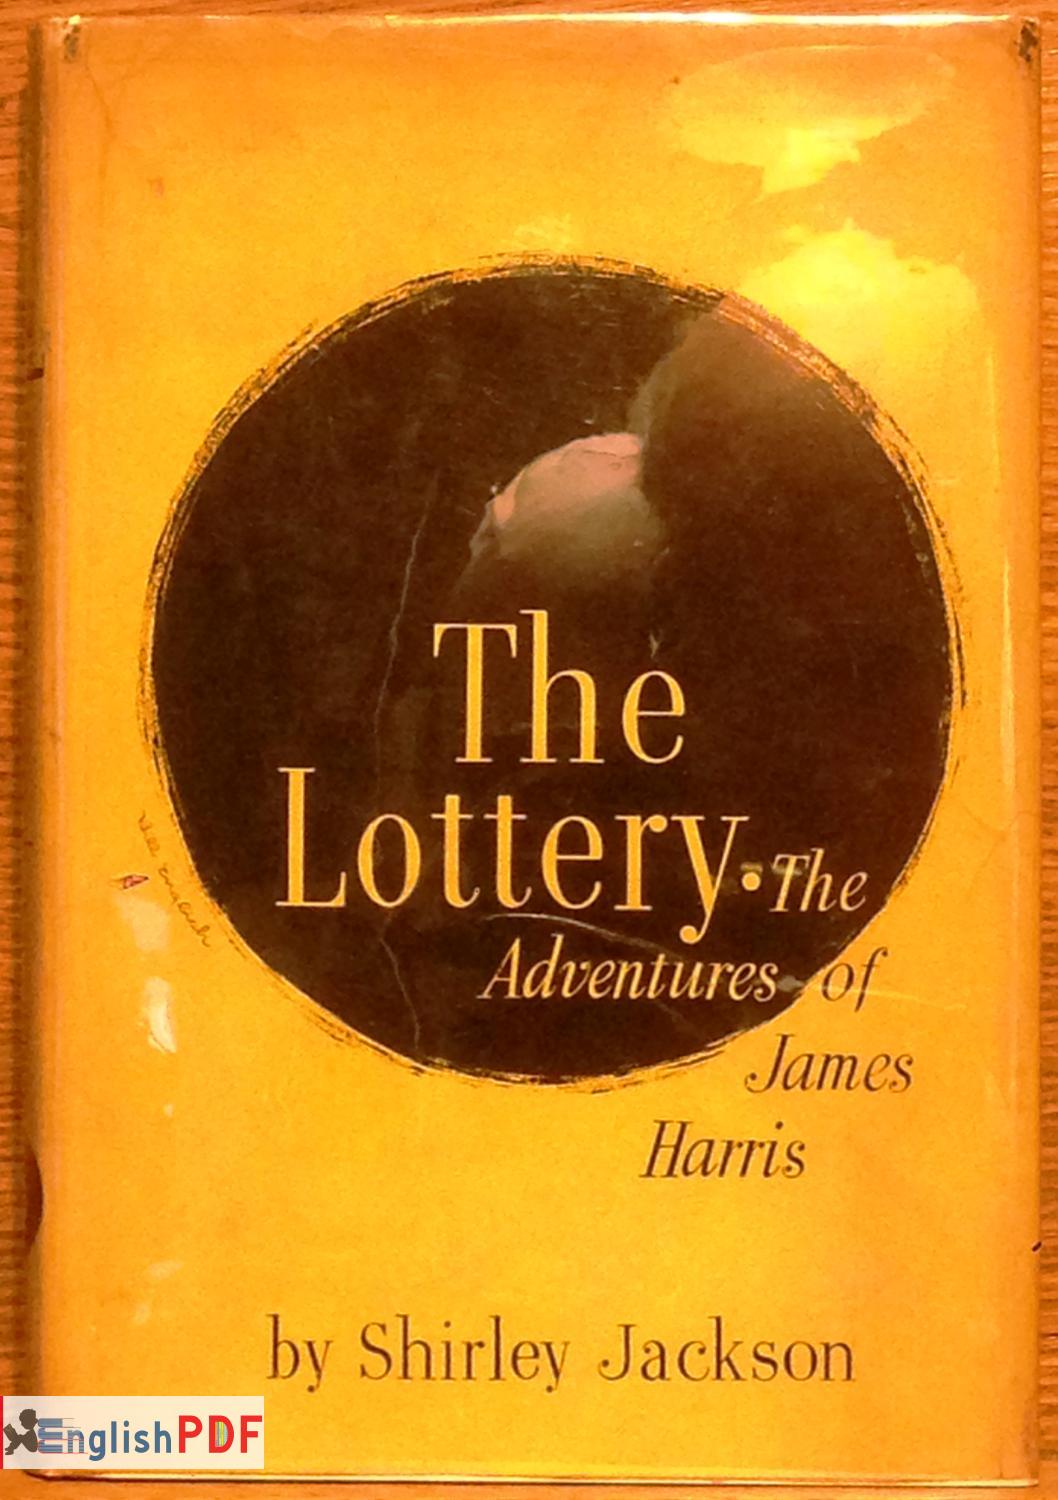 the lottery by shirley jackson characters